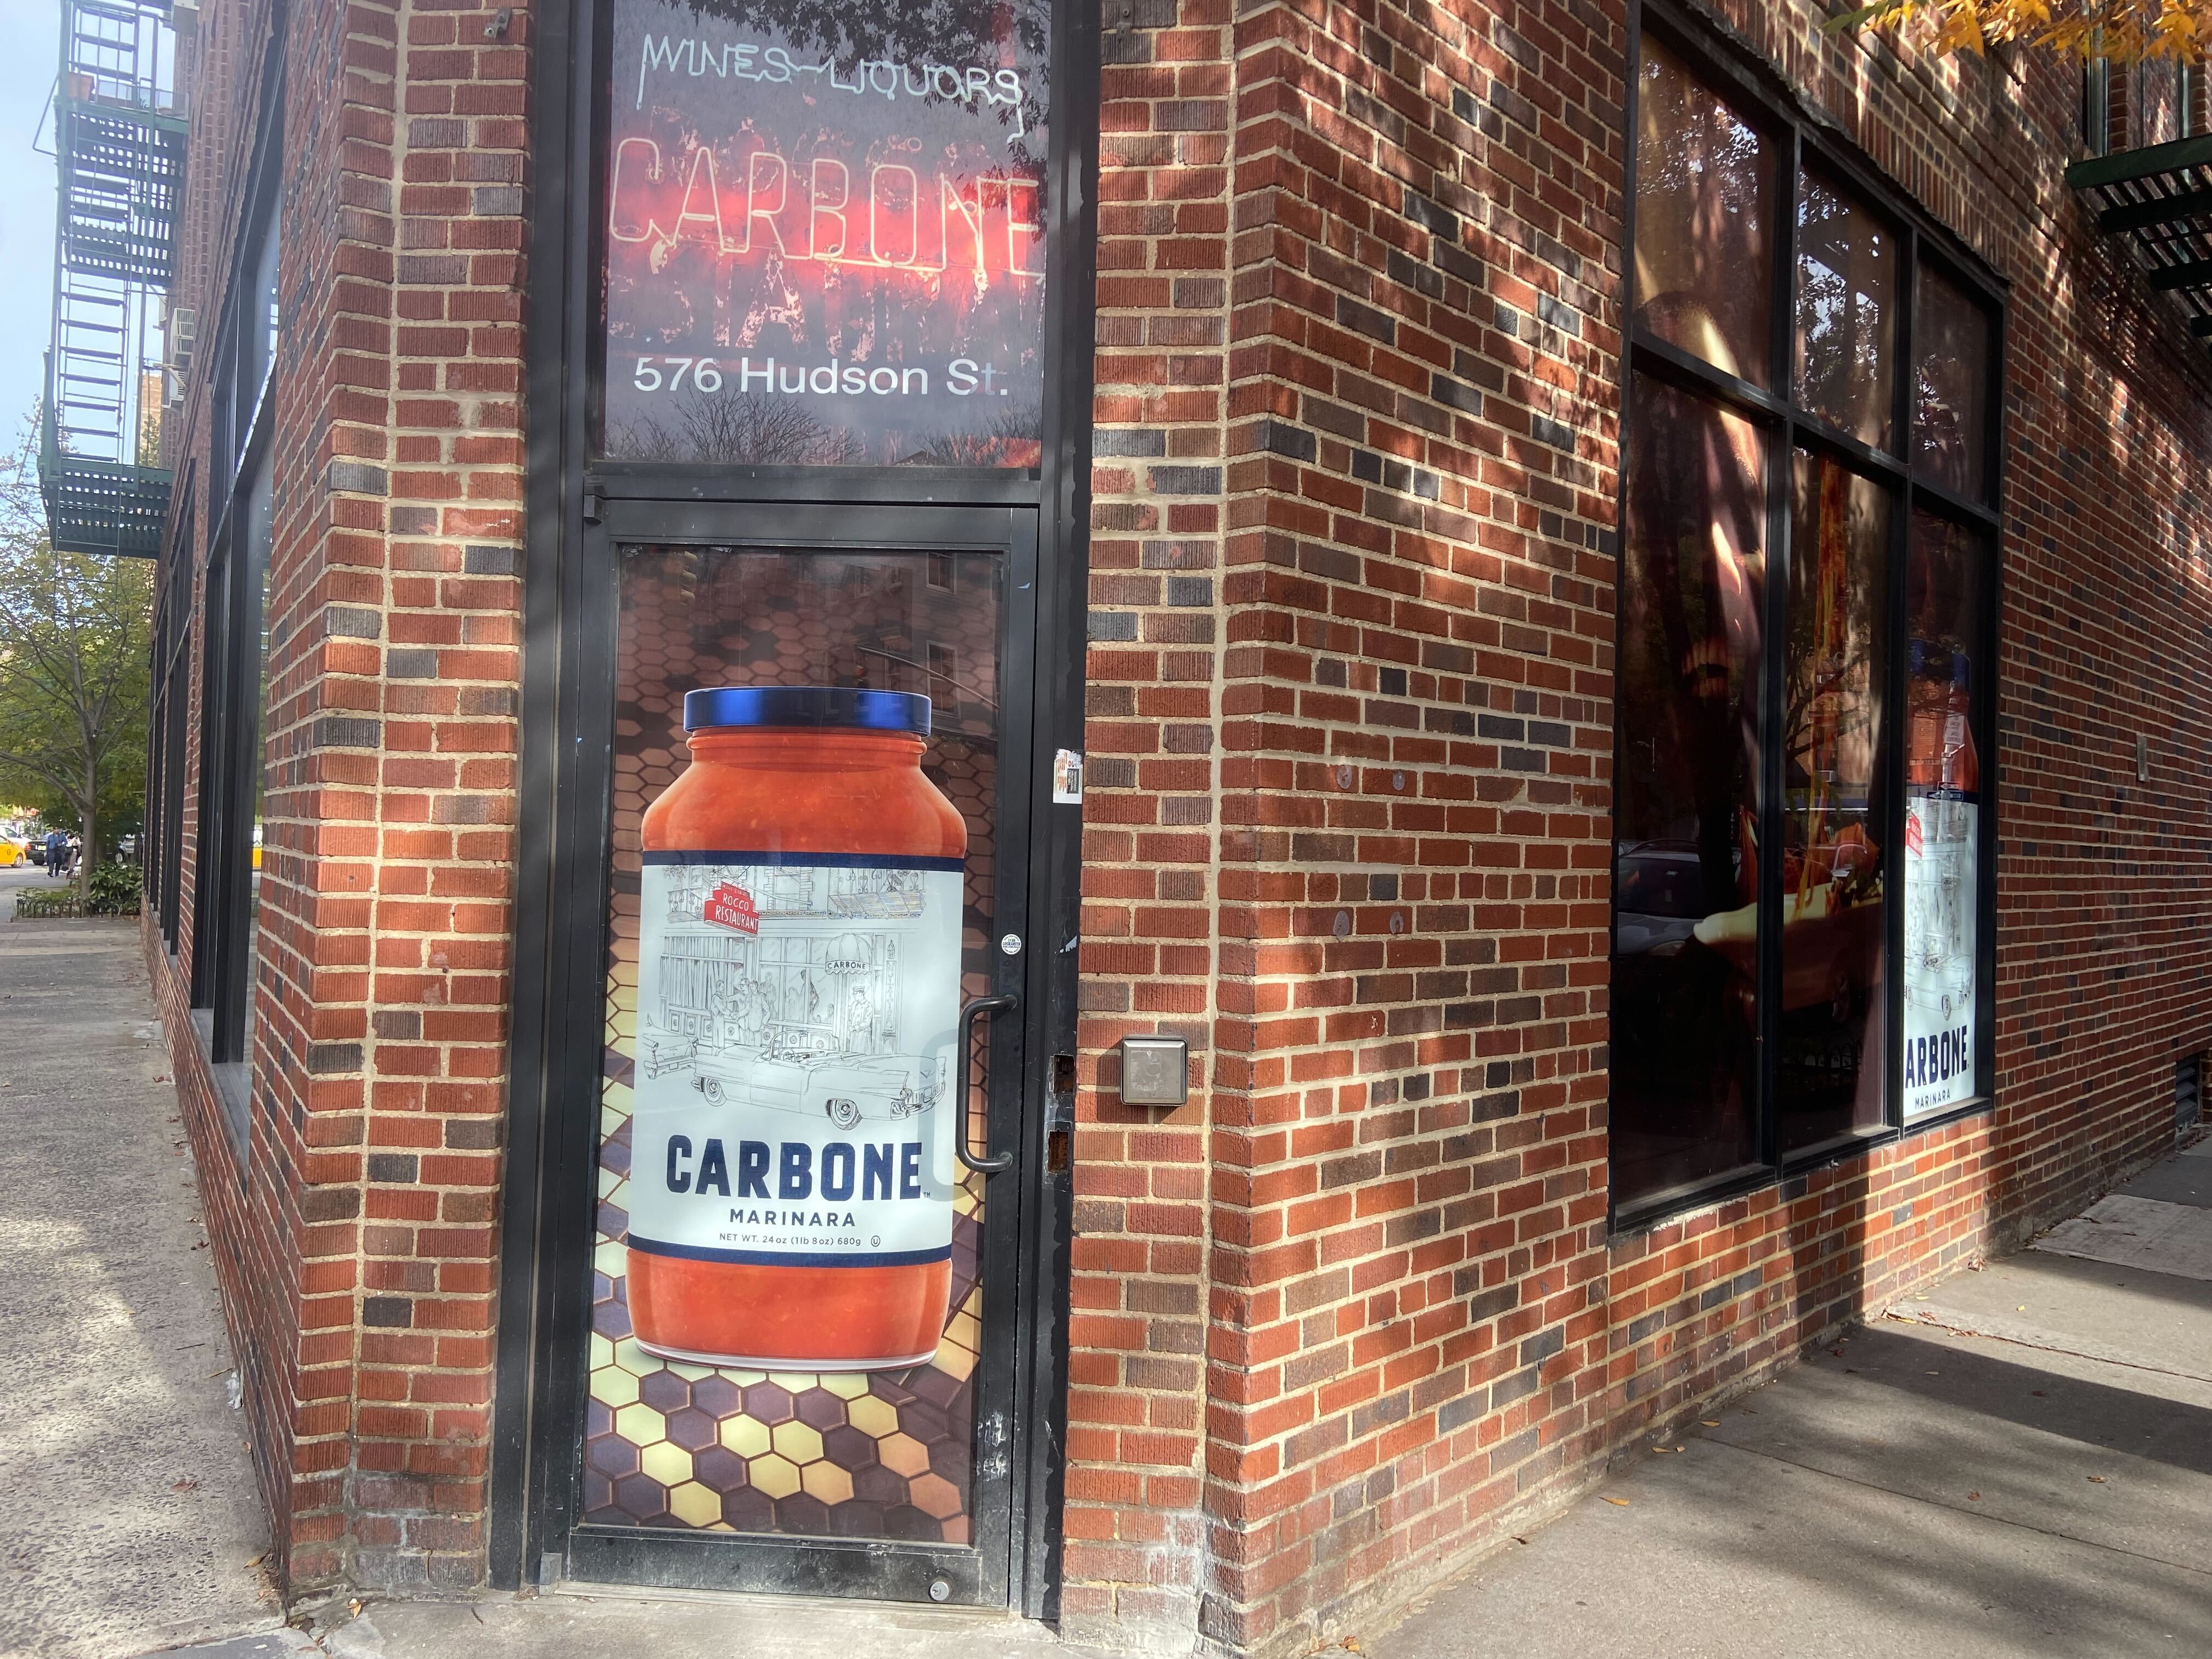 The exterior of 576 Hudson Street with signage for Carbone pasta sauce.